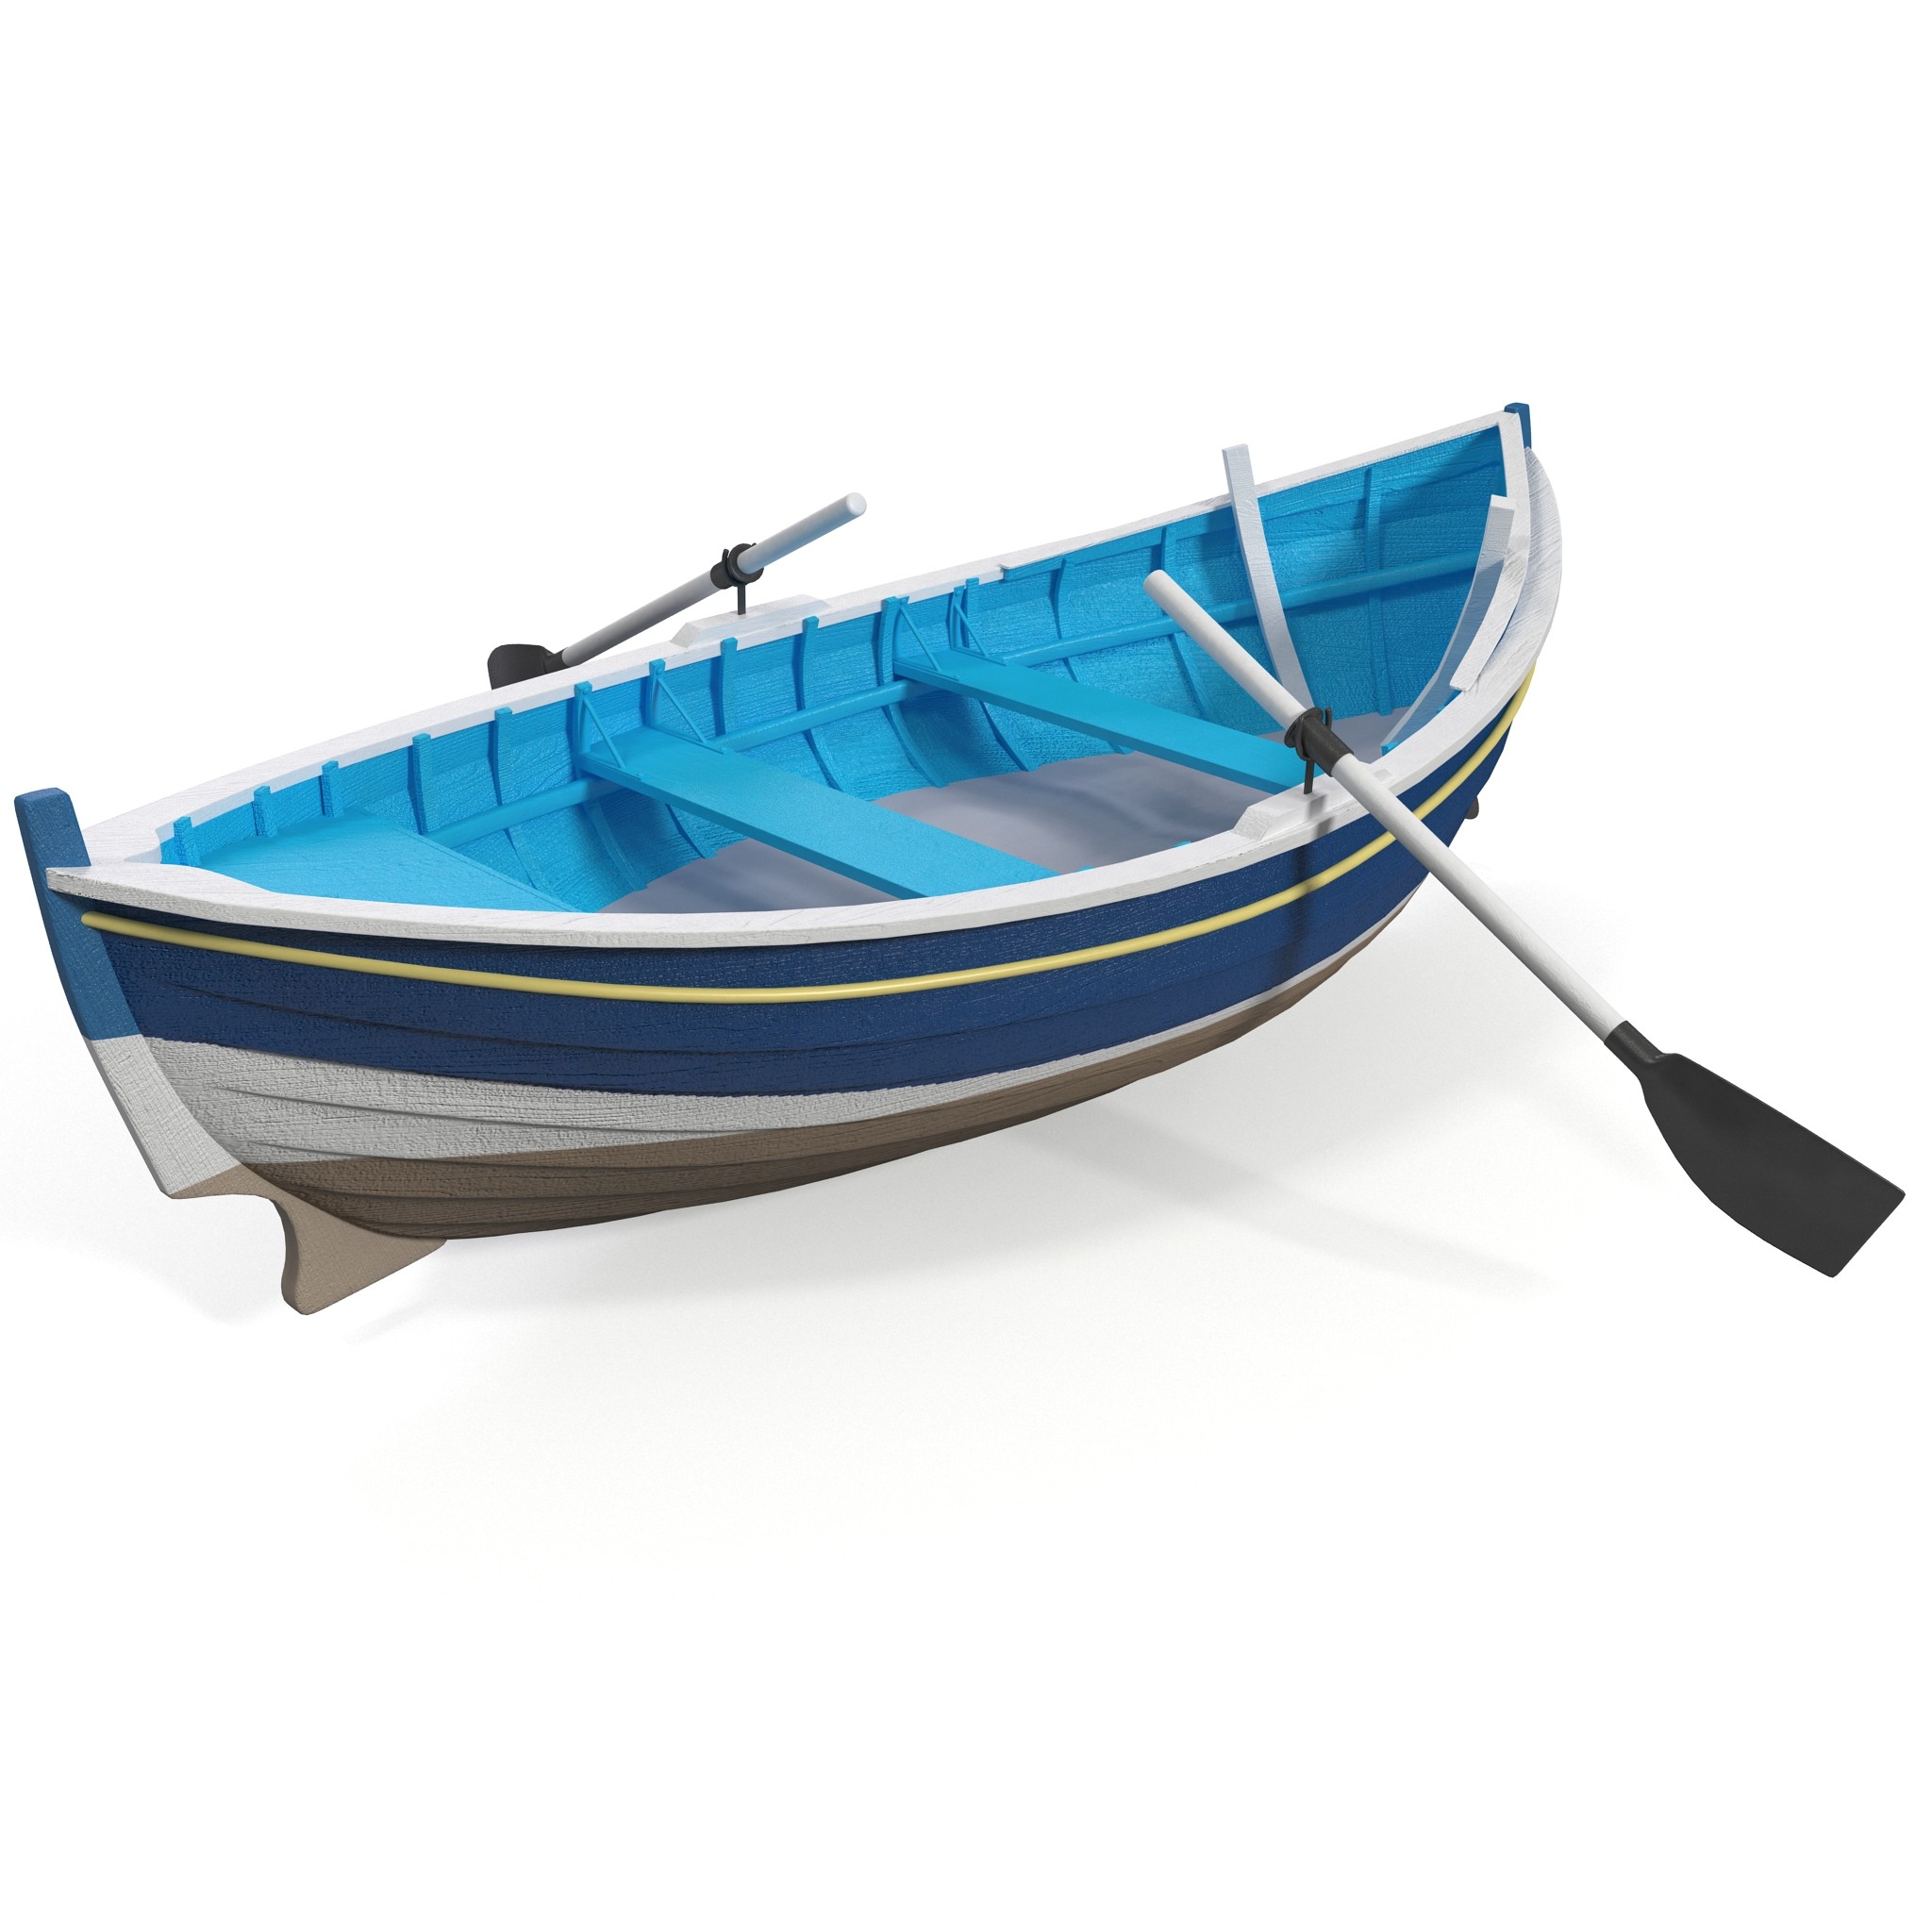 Rowing Shell Png - Row Boat 3D Models And Textures | Turbosquid Pluspng.com, Transparent background PNG HD thumbnail